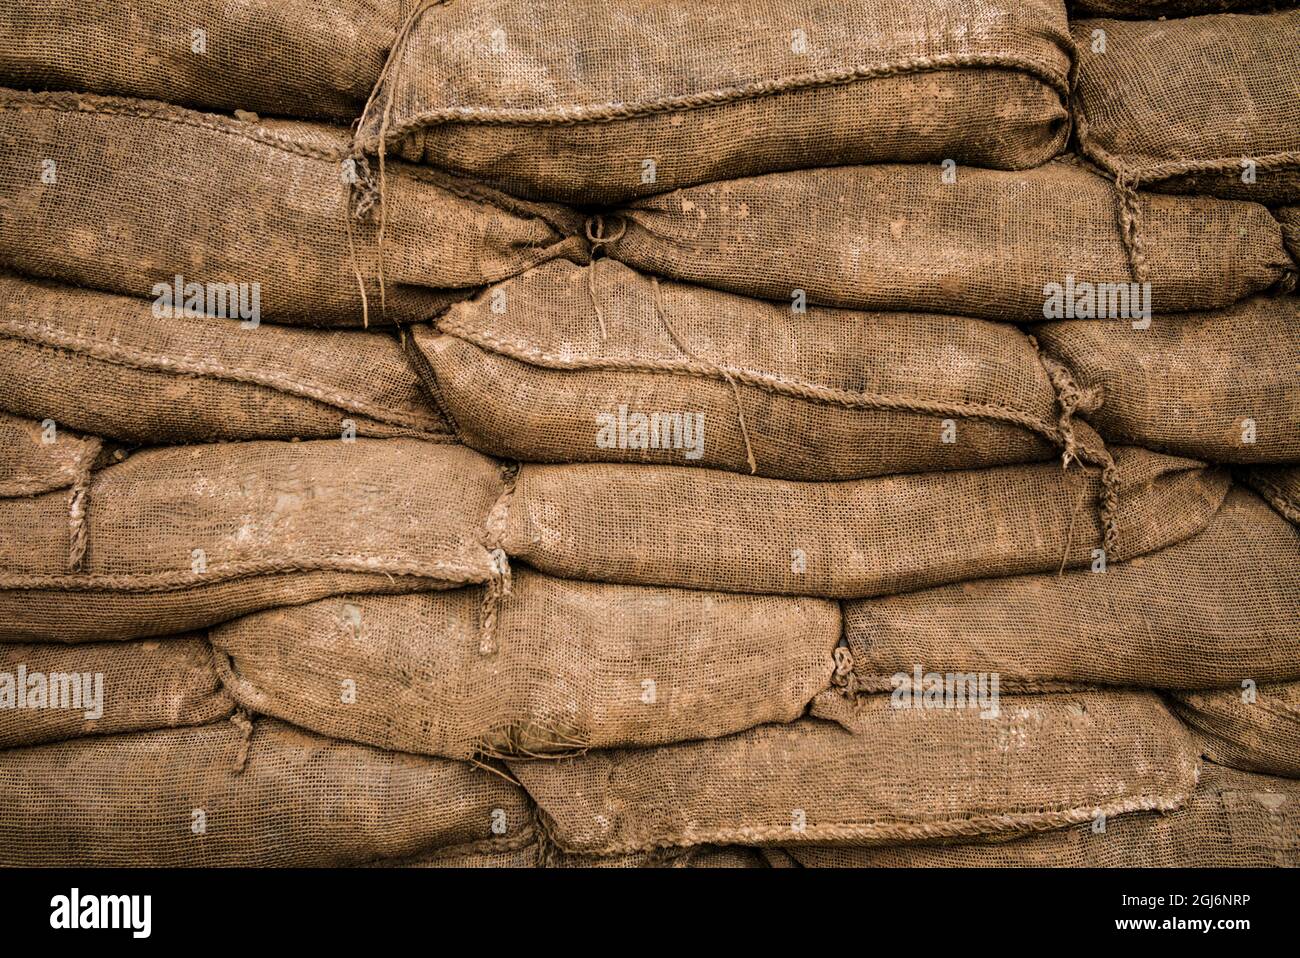 Canada, Nova Scotia, Halifax. Military display for the end of World War One centennial, trench sandbags. Stock Photo